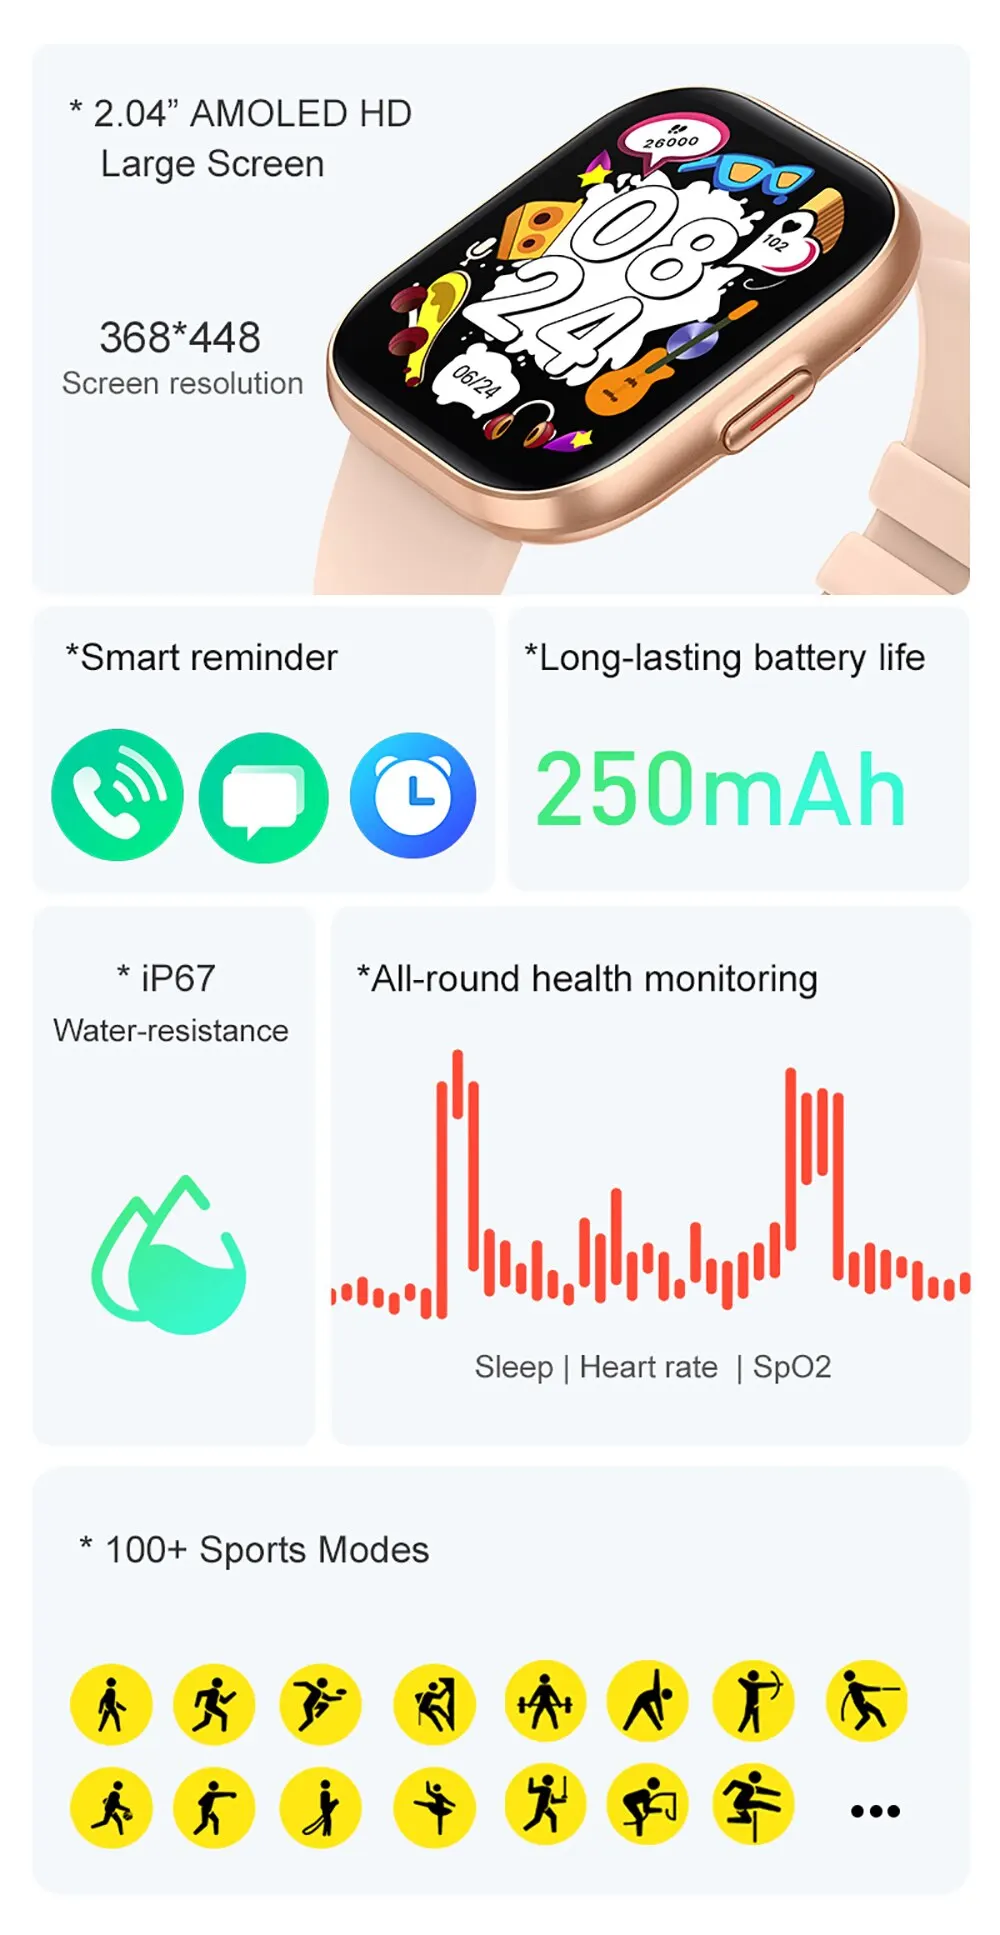 COLMI P68 Smartwatch 2.04'' AMOLED Screen 100 Sports Modes 7 Day Battery Life Support Always On Display Smart Watch Men Women